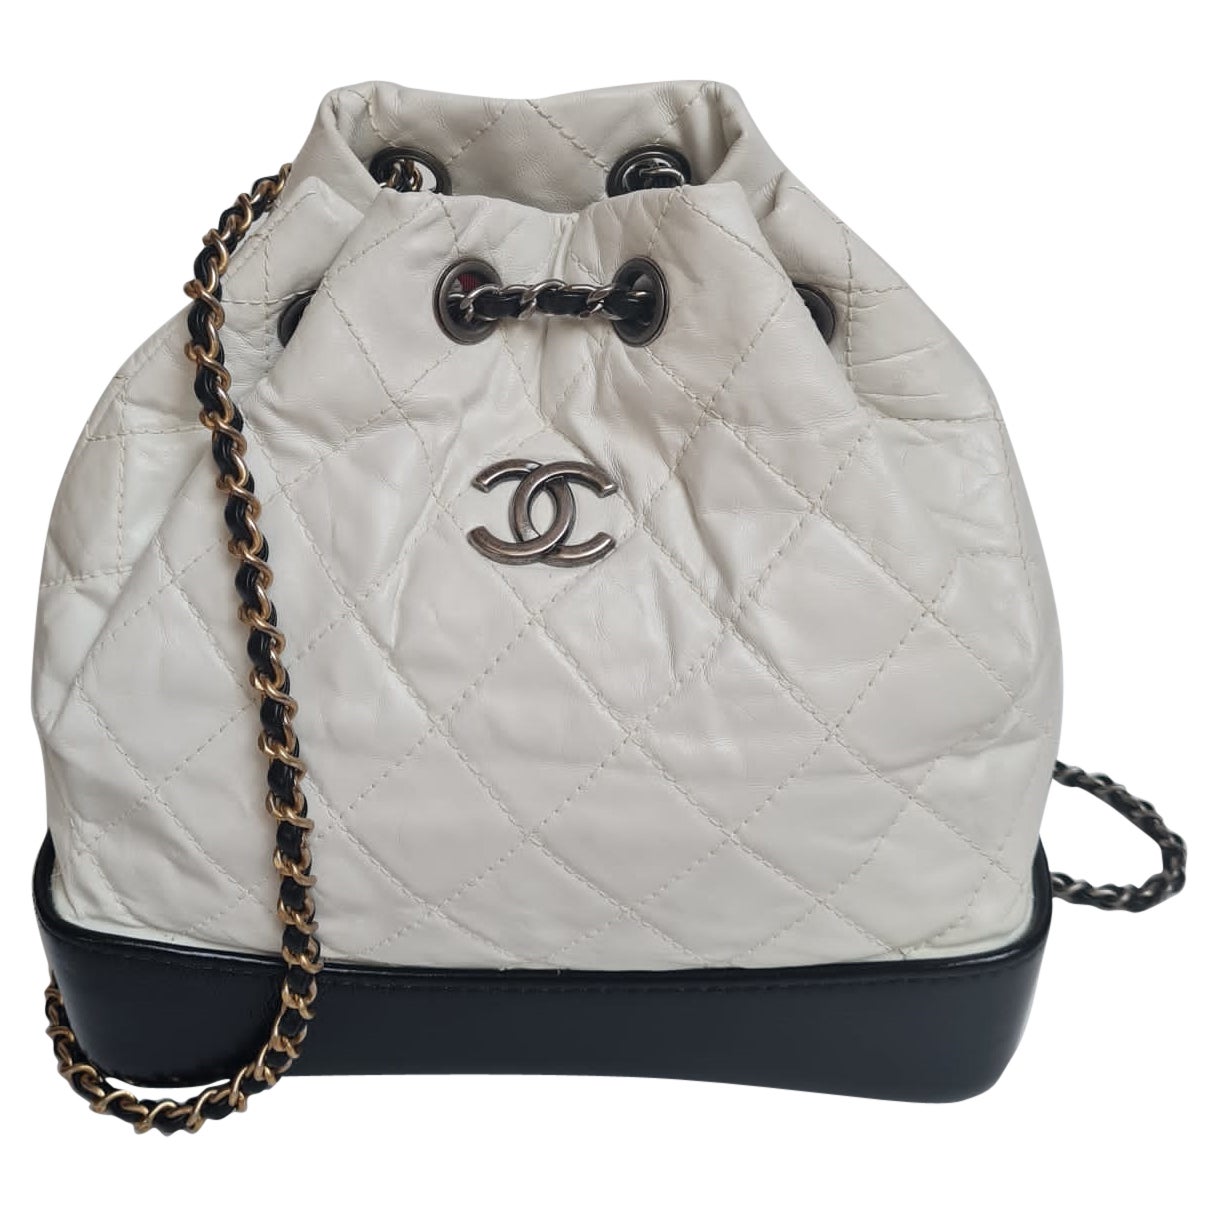 Chanel White Quilted Purse - 141 For Sale on 1stDibs  chanel white bag  price, white quilted chanel handbag, white quilted chanel purse